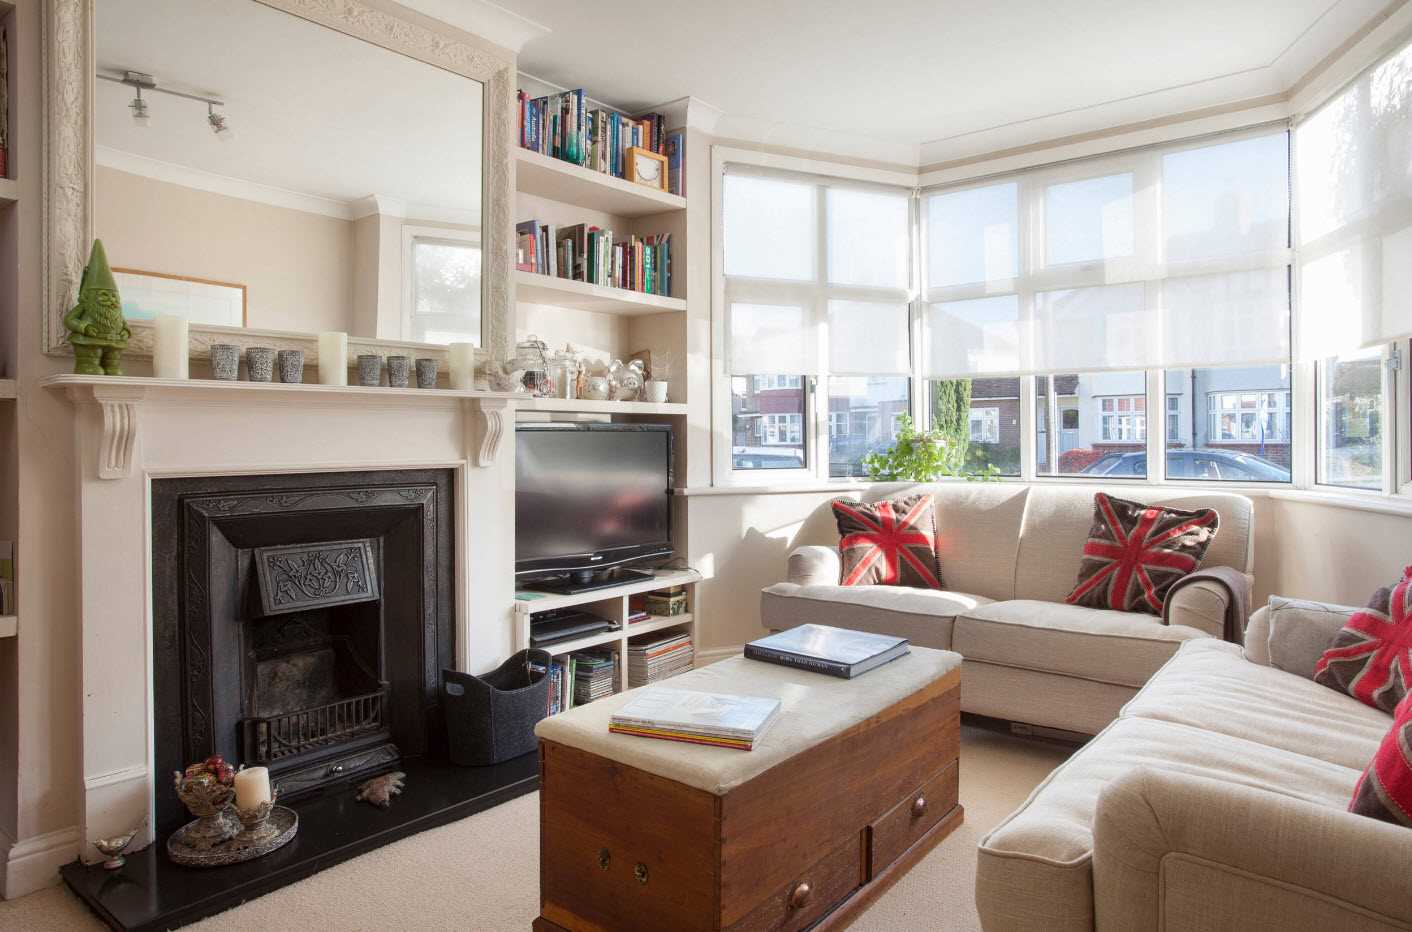 An example of a bright living room design with a bay window